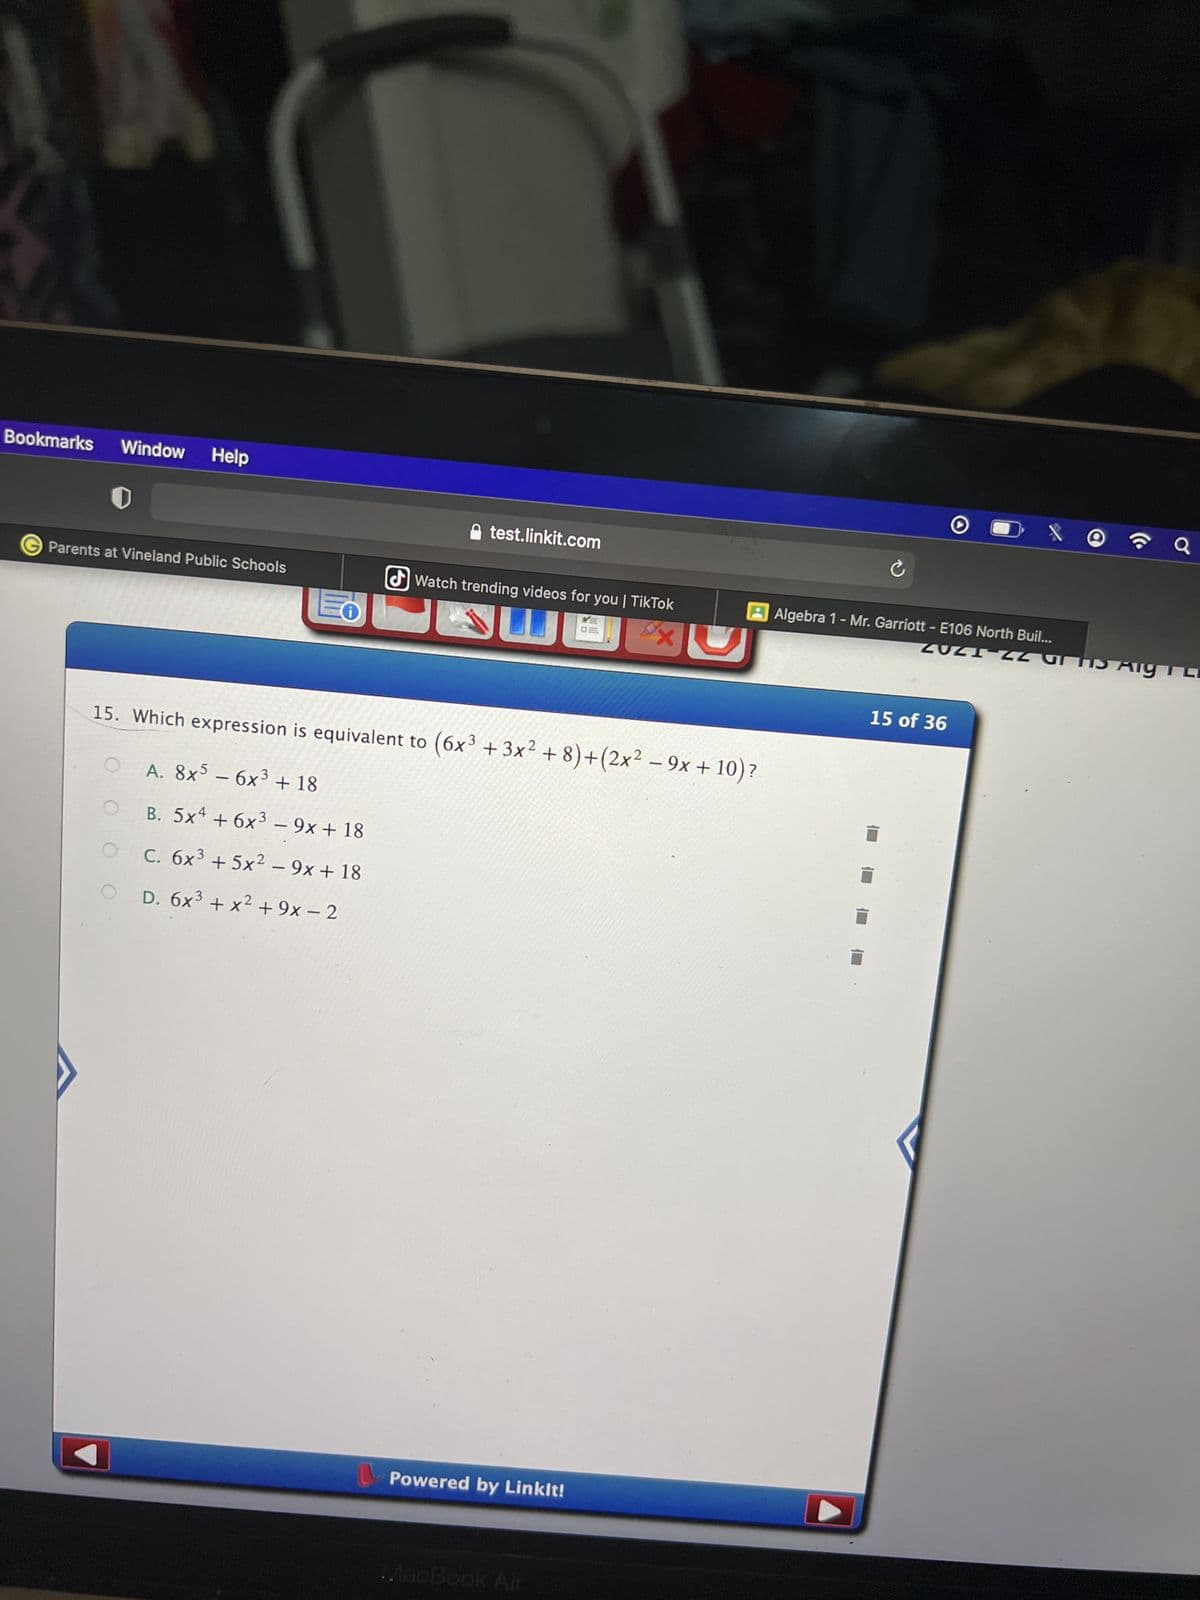 Bookmarks Window Help
test.linkit.com
Parents at Vineland Public Schools
Watch trending videos for you | TikTok
O
x
15. Which expression is equivalent to (6x³ +3x²+8)+(2x² − 9x + 10)?
-
A. 8x5 - 6x³ + 18
B. 5x4 + 6x³ - 9x + 18
O
C. 6x³ +5x² - 9x + 18
OD. 6x³ + x² +9x−2
Powered by Linkit!
MacBook Air
Q
ZUZI 22 GHS Aig T L
Ć
AAlgebra 1 - Mr. Garriott - E106 North Buil...
15 of 36